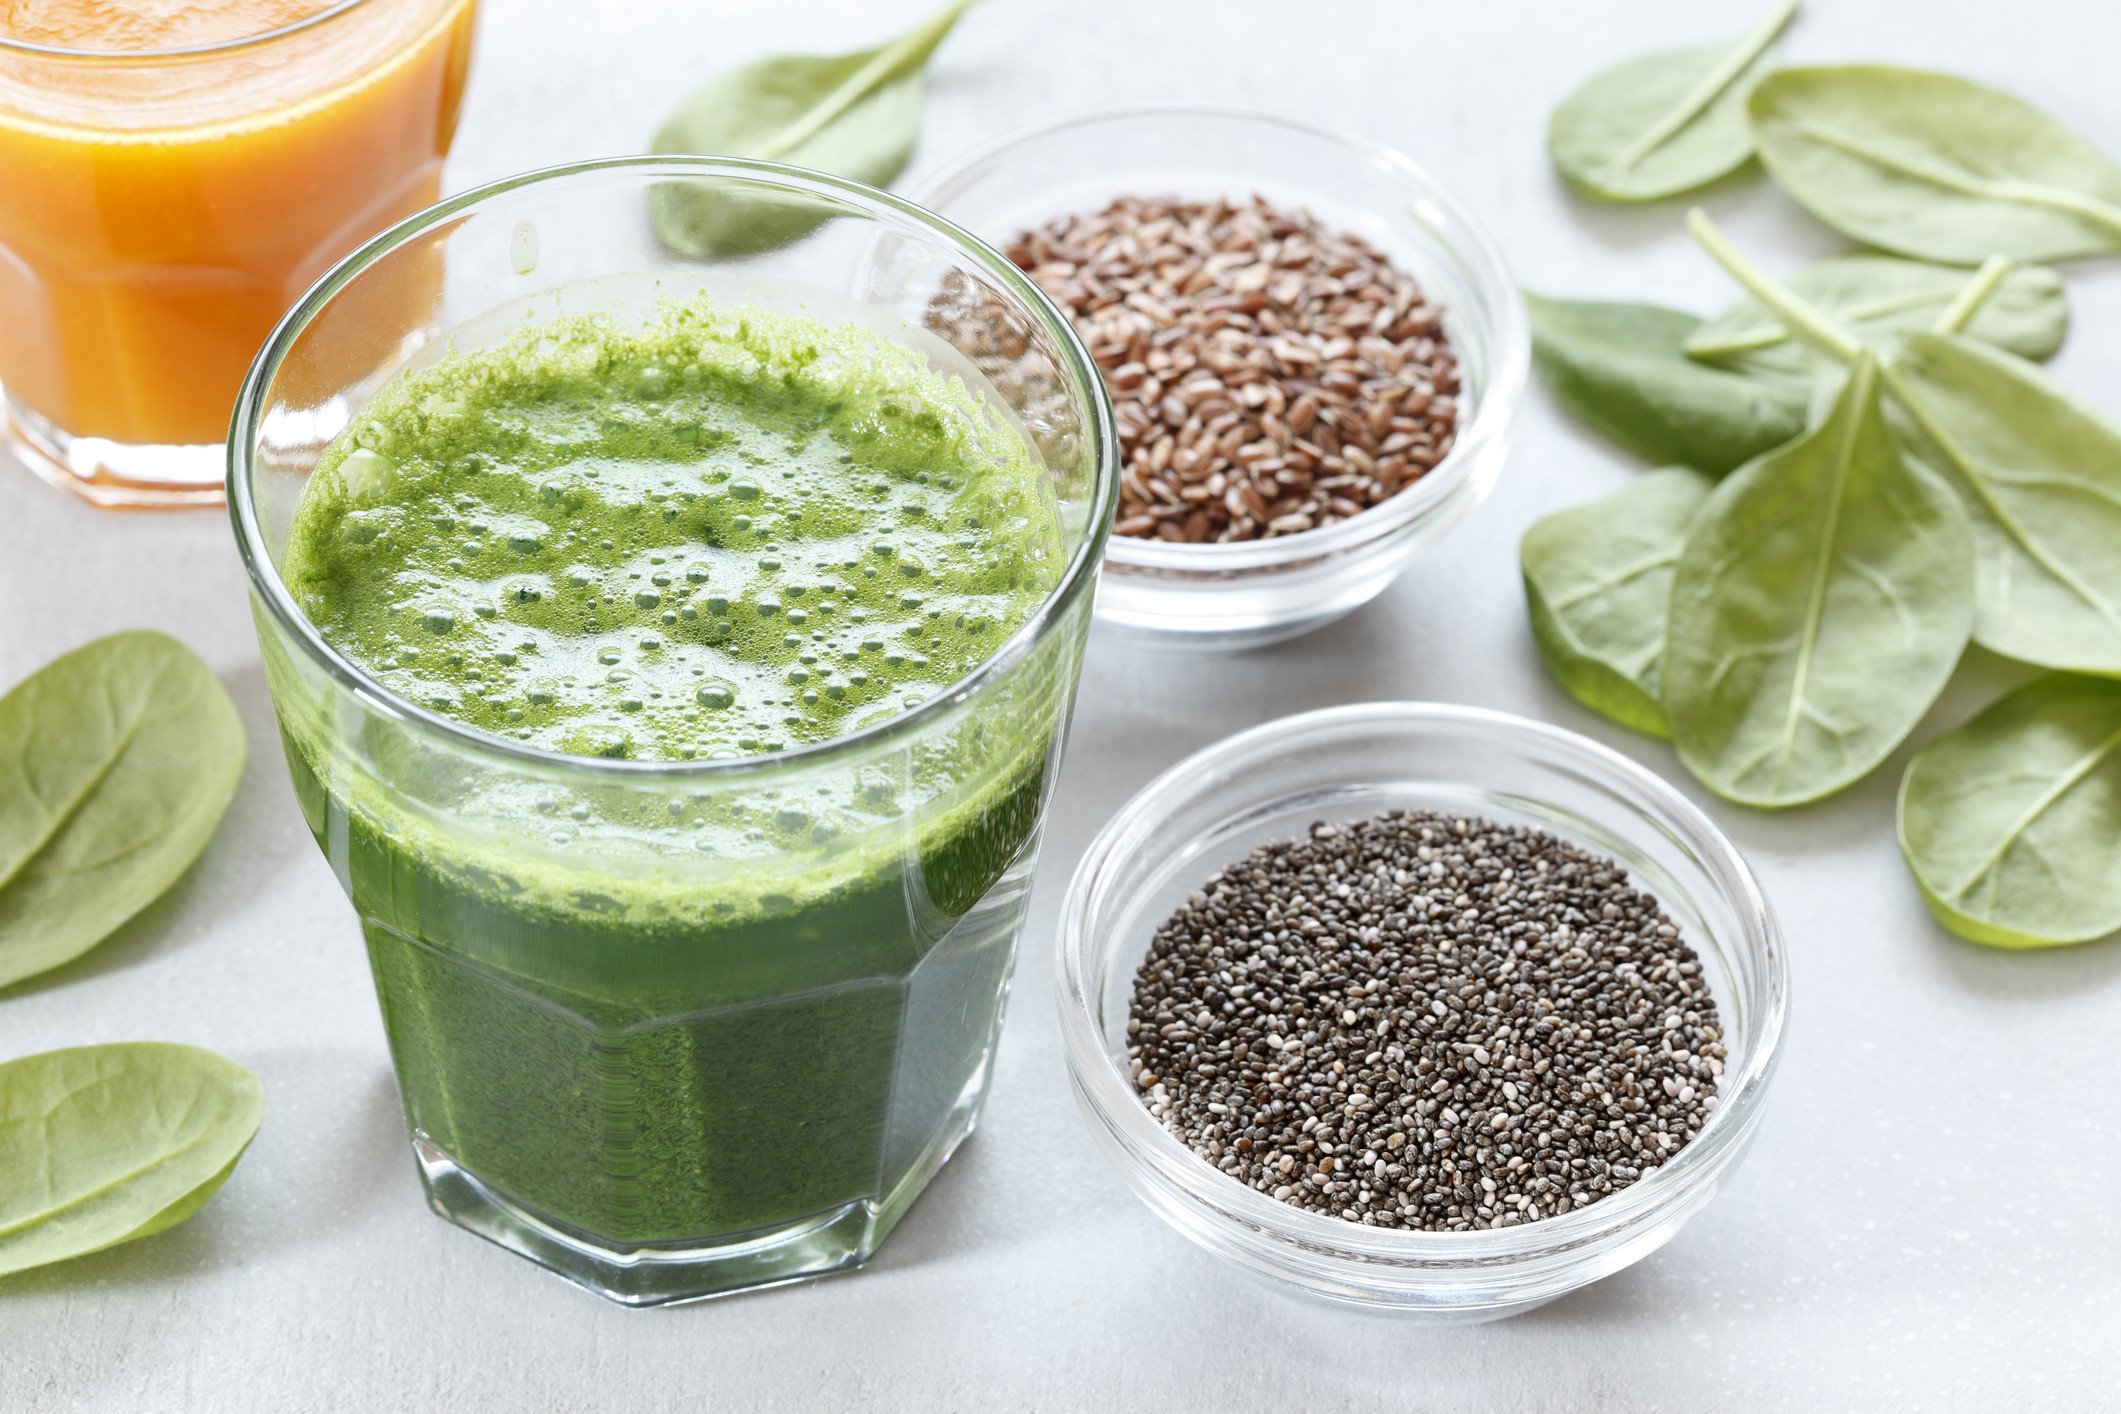 An image of a Green superfood smoothie with spinach and seeds.